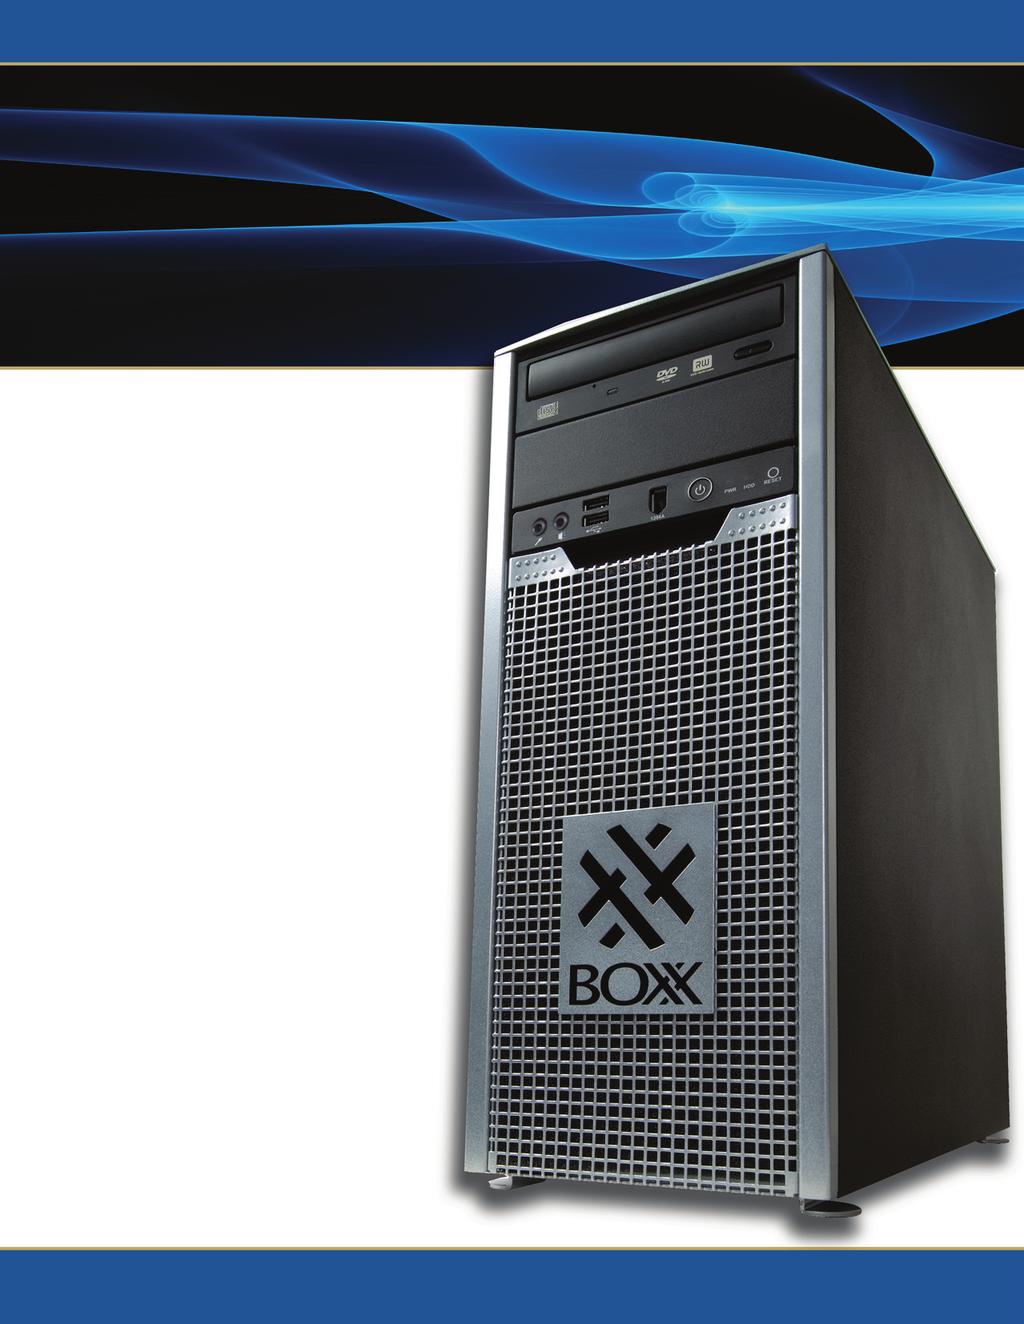 The Professional s Choice 3960 Series XTREME Edition High performance entry level single processor workstations (2nd Generation Intel Core i7) Over clocked to runs up to 4.